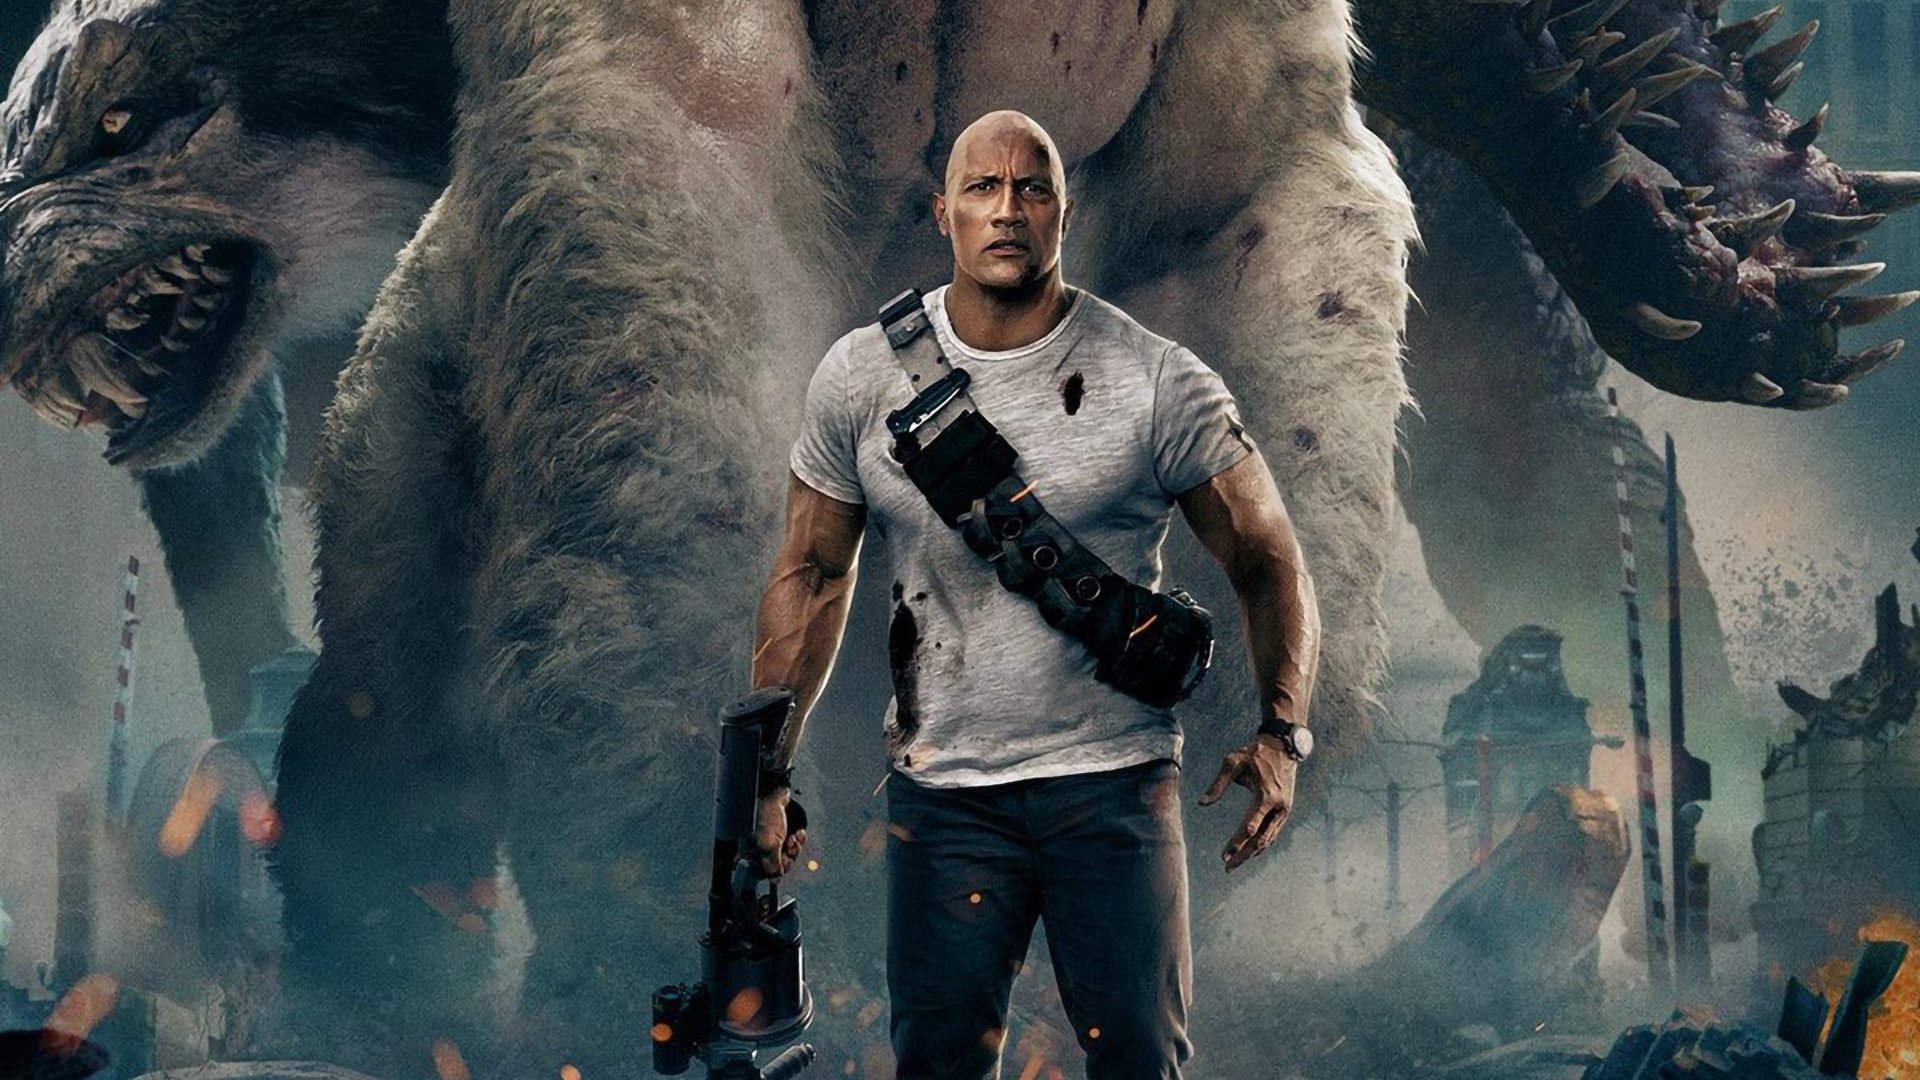 Dwayne 'The Rock' Johnson says he's starring in another video game movie